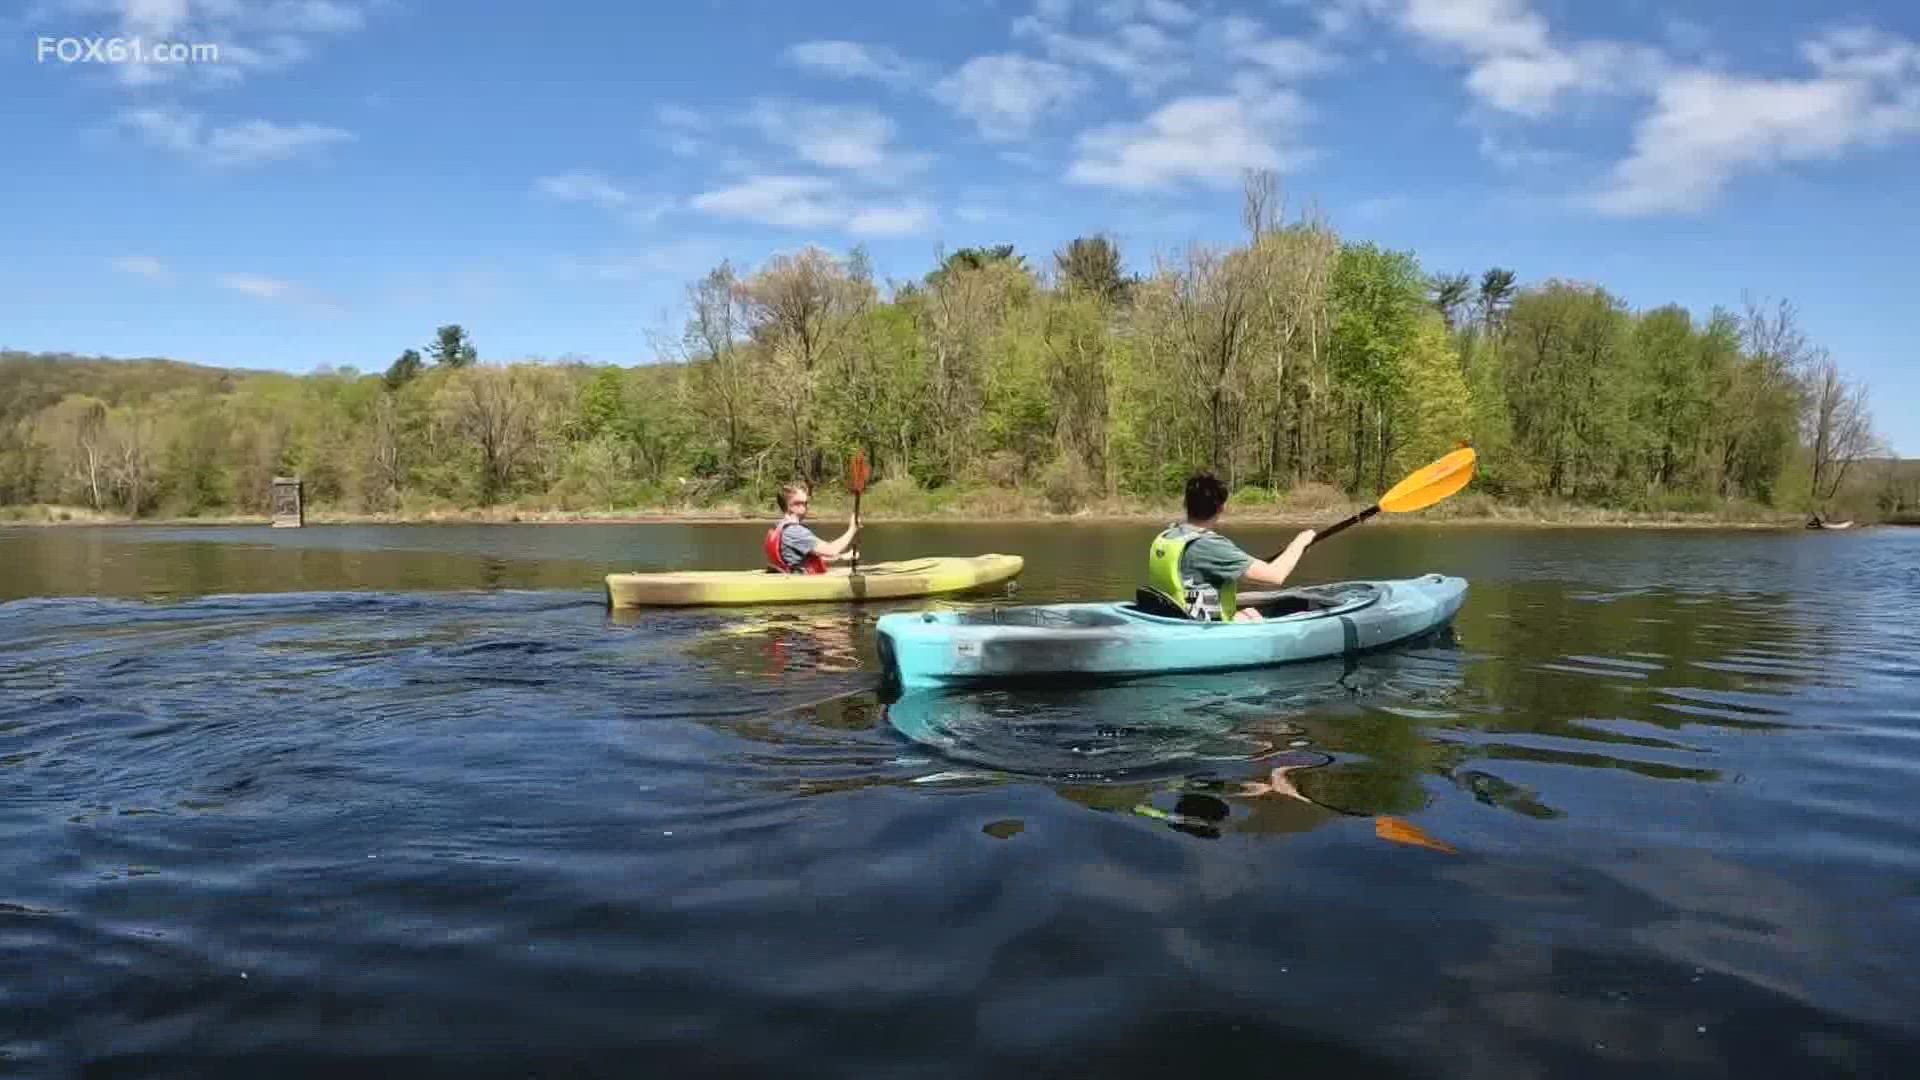 With COVID restrictions lifted, people are coming back to the Farmington River early to canoe